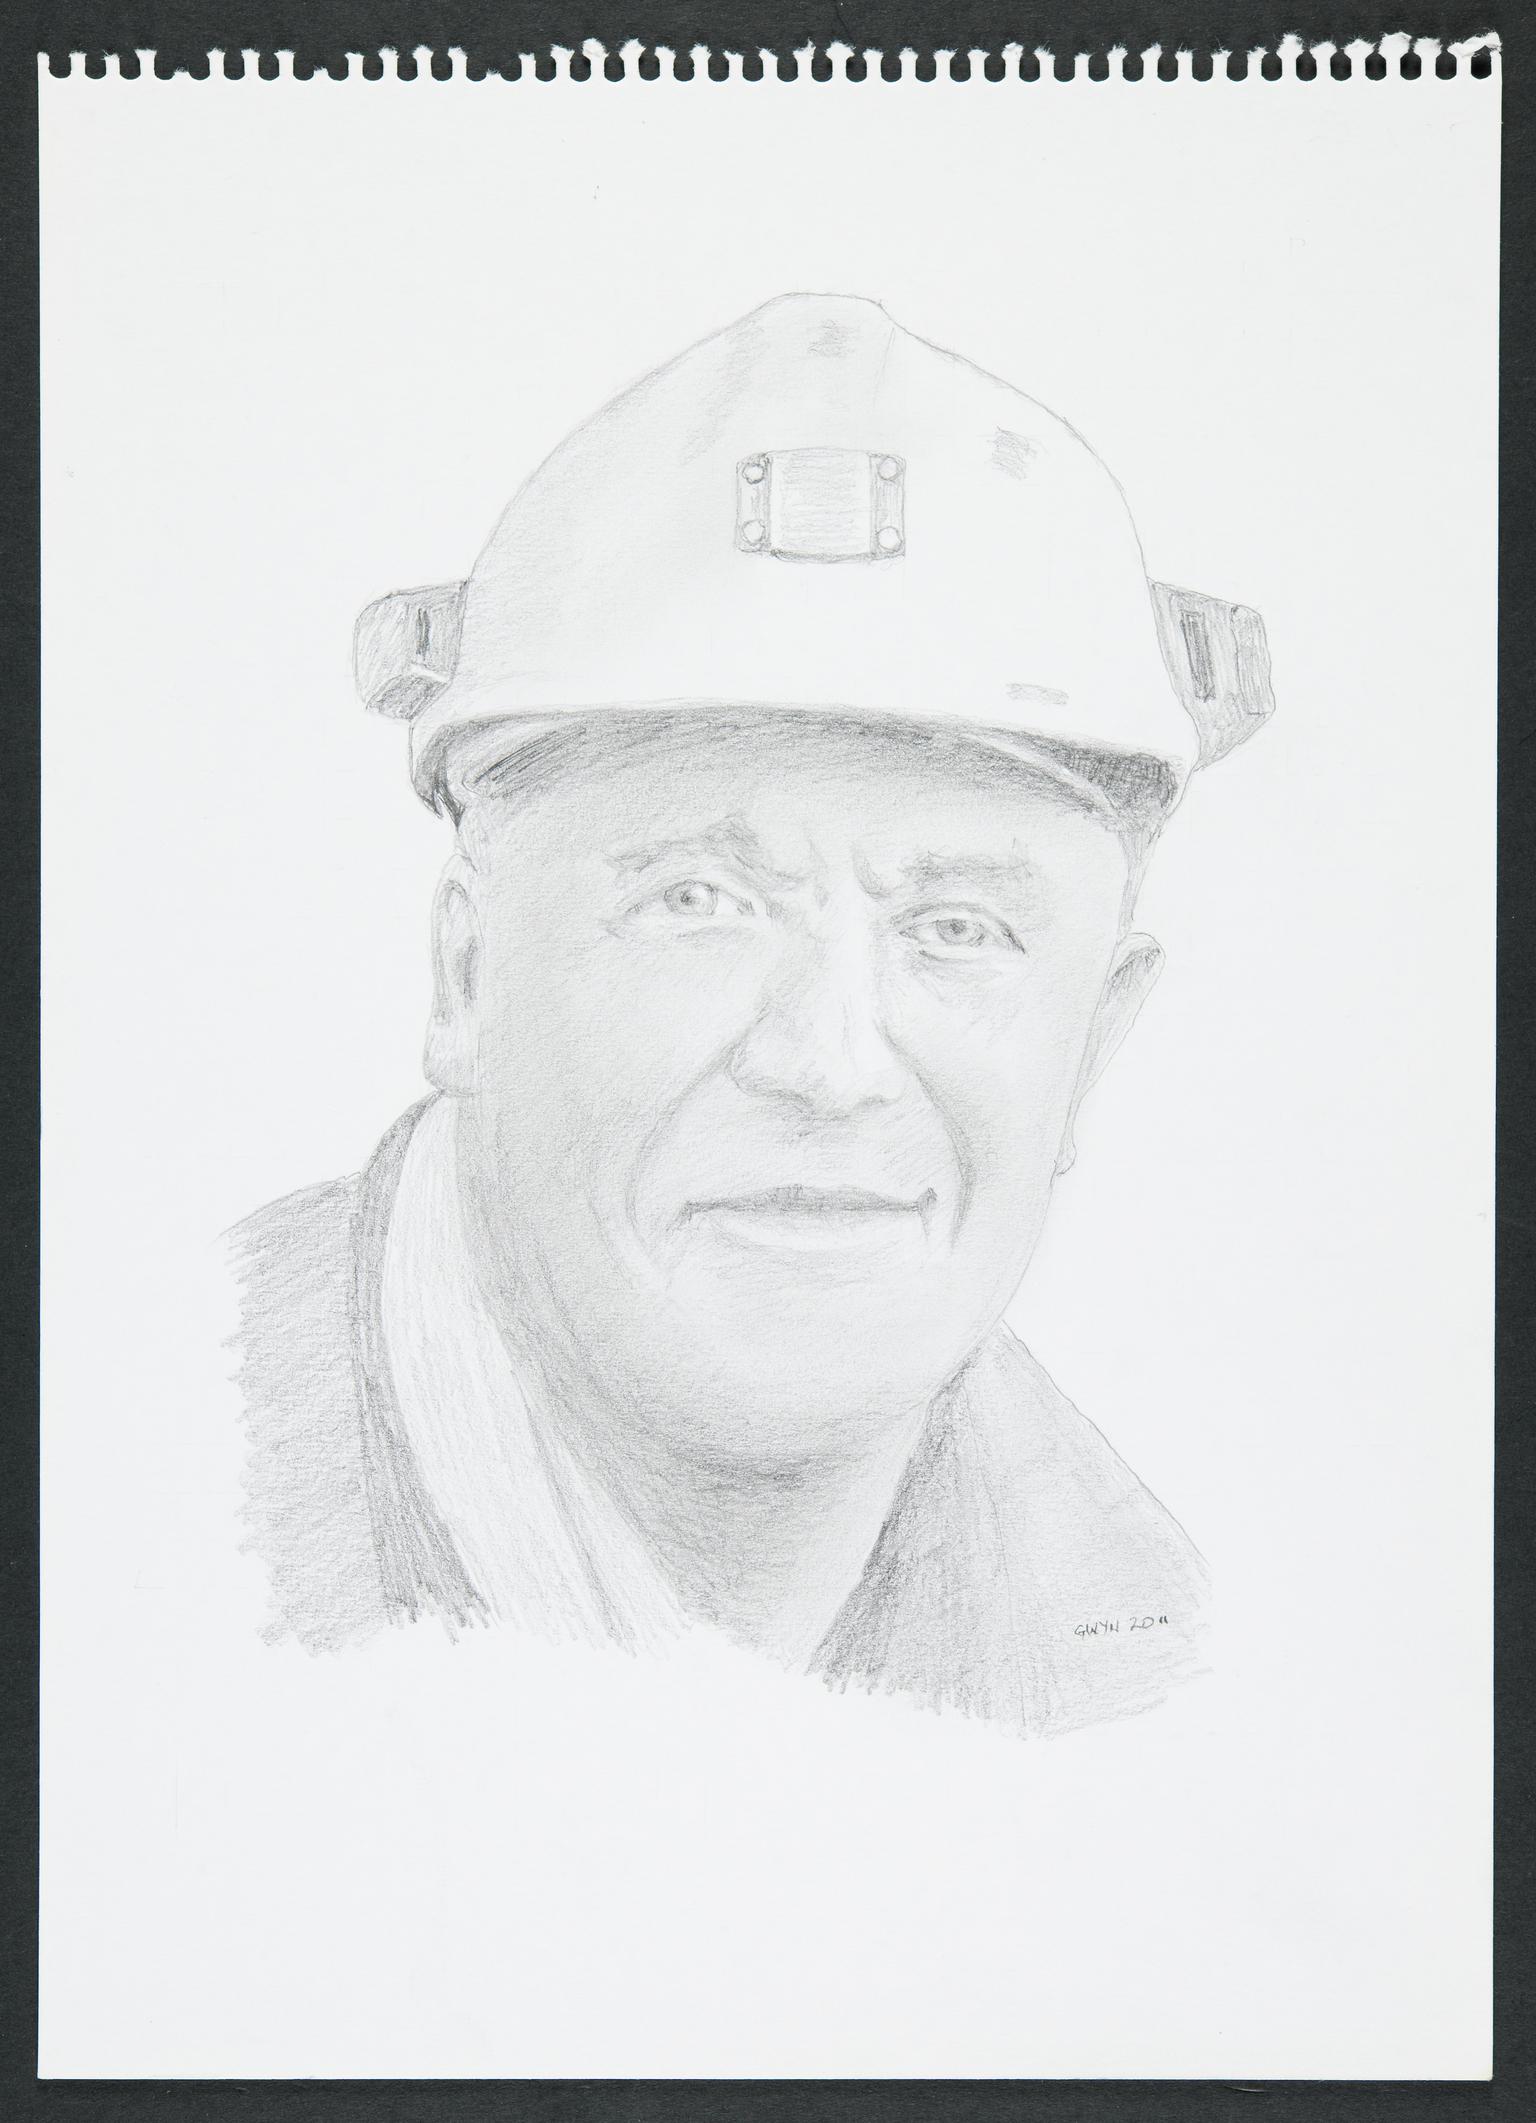 Russell Waite (drawing)